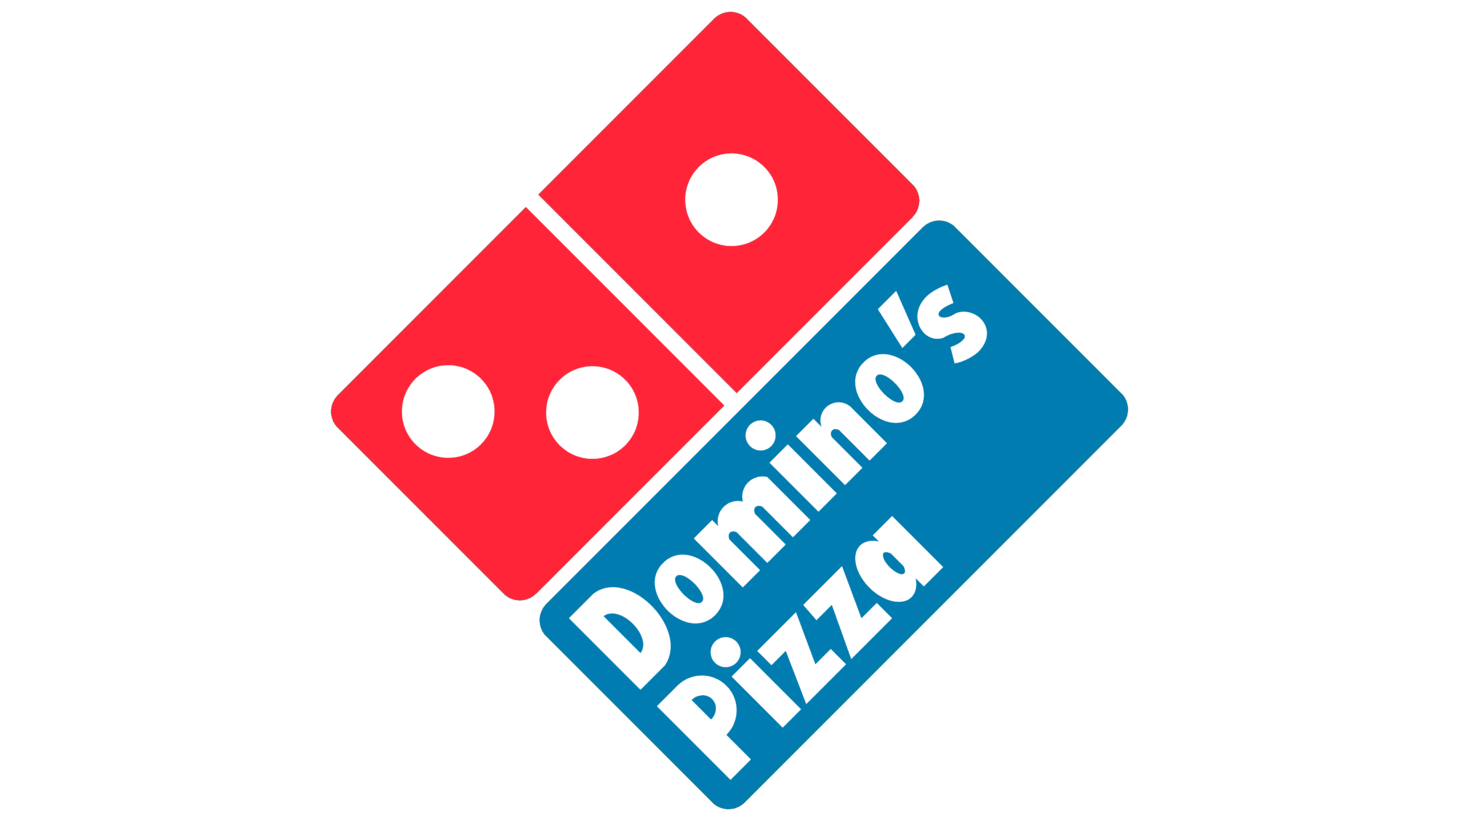 Dominos pizza sign 1996 2012